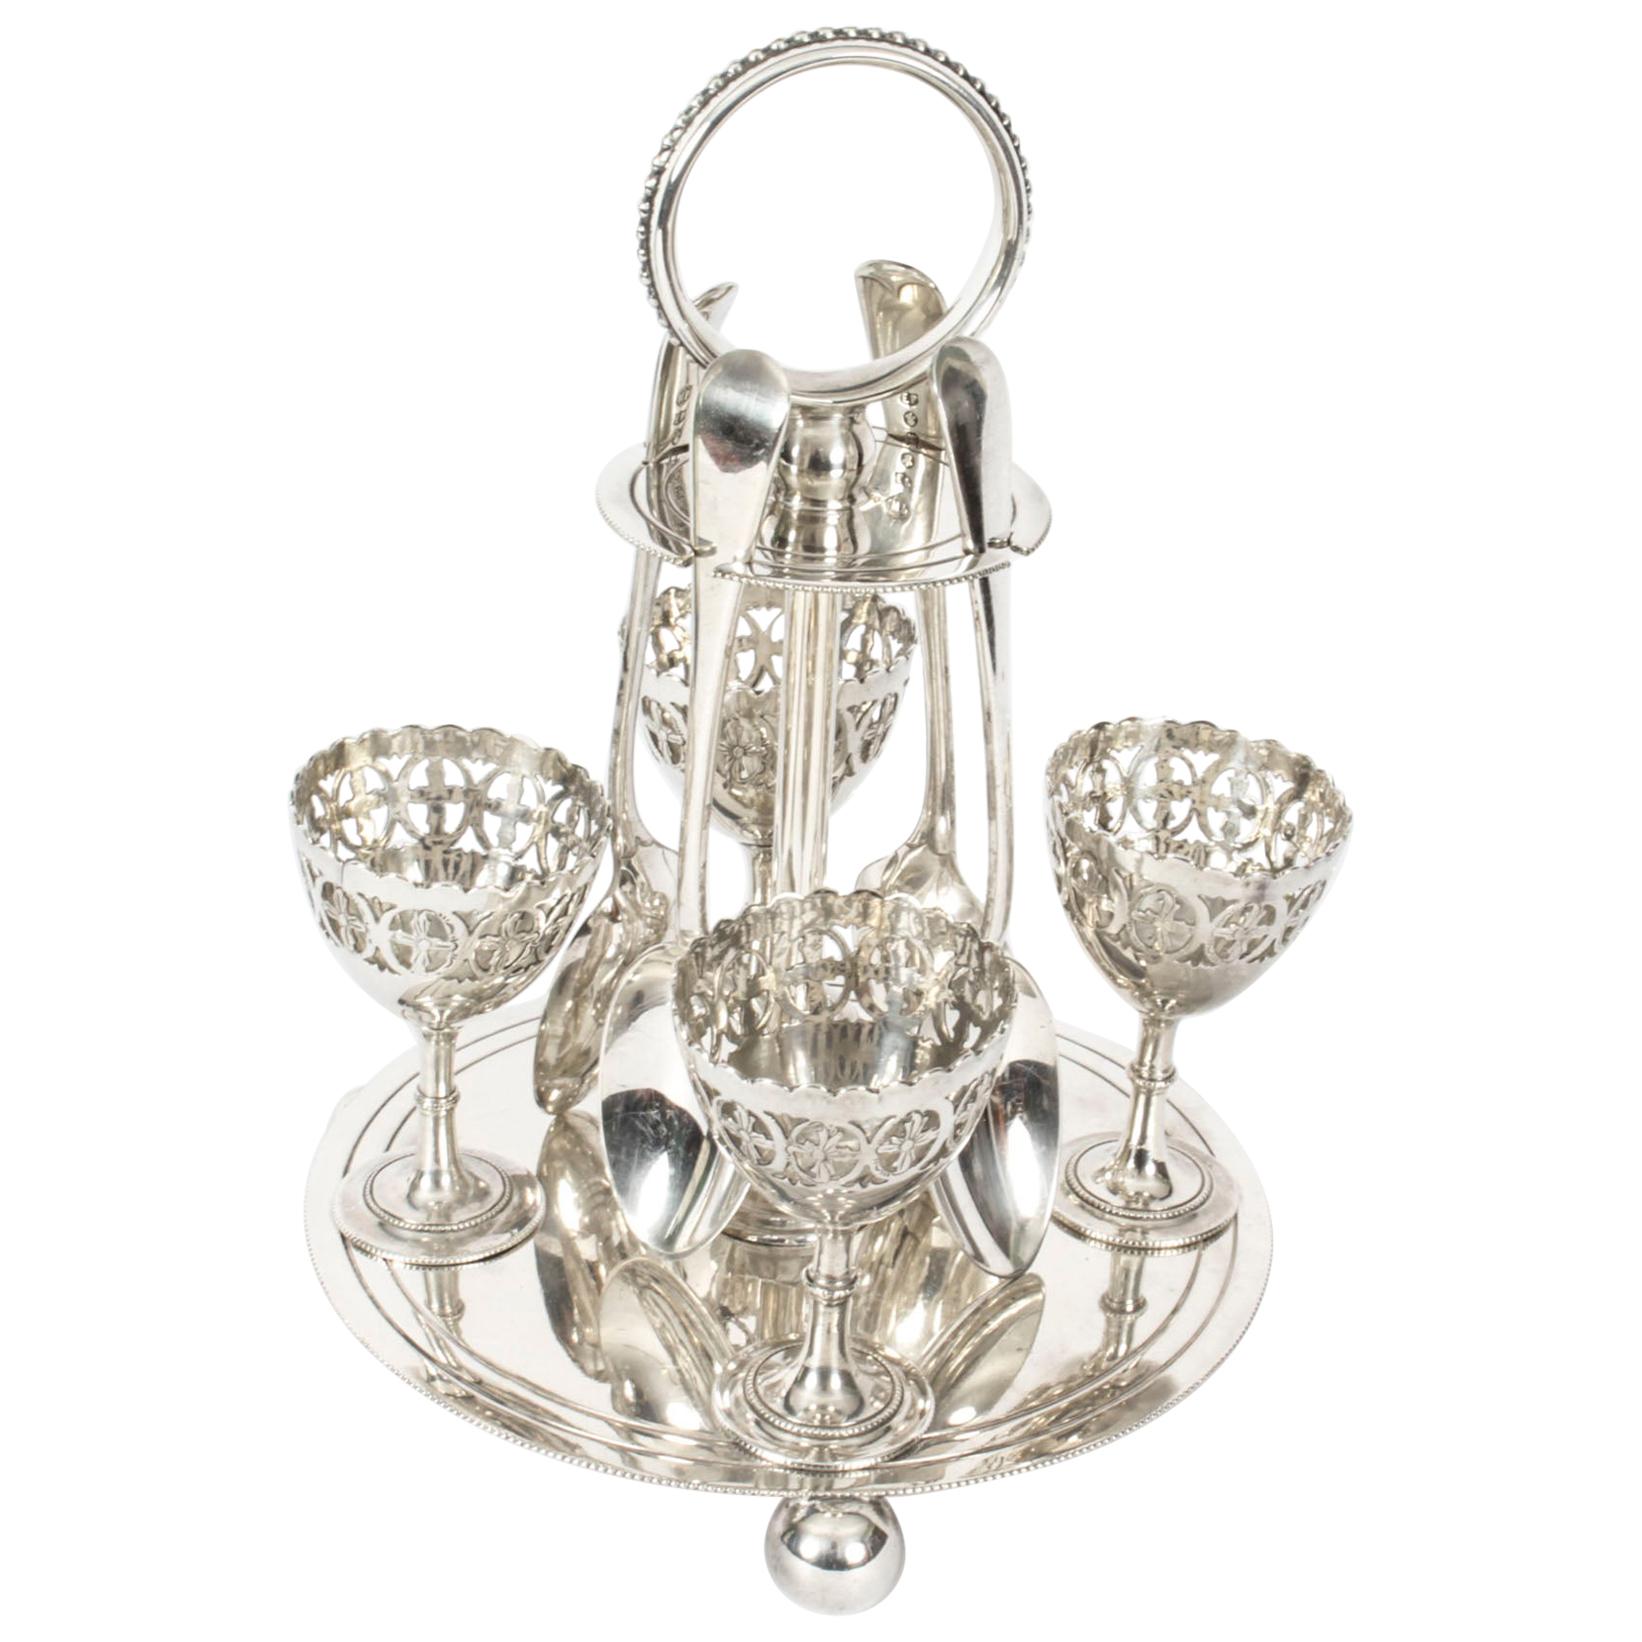 Antique Silver Plated Egg Cruet with Spoons, 19th Century